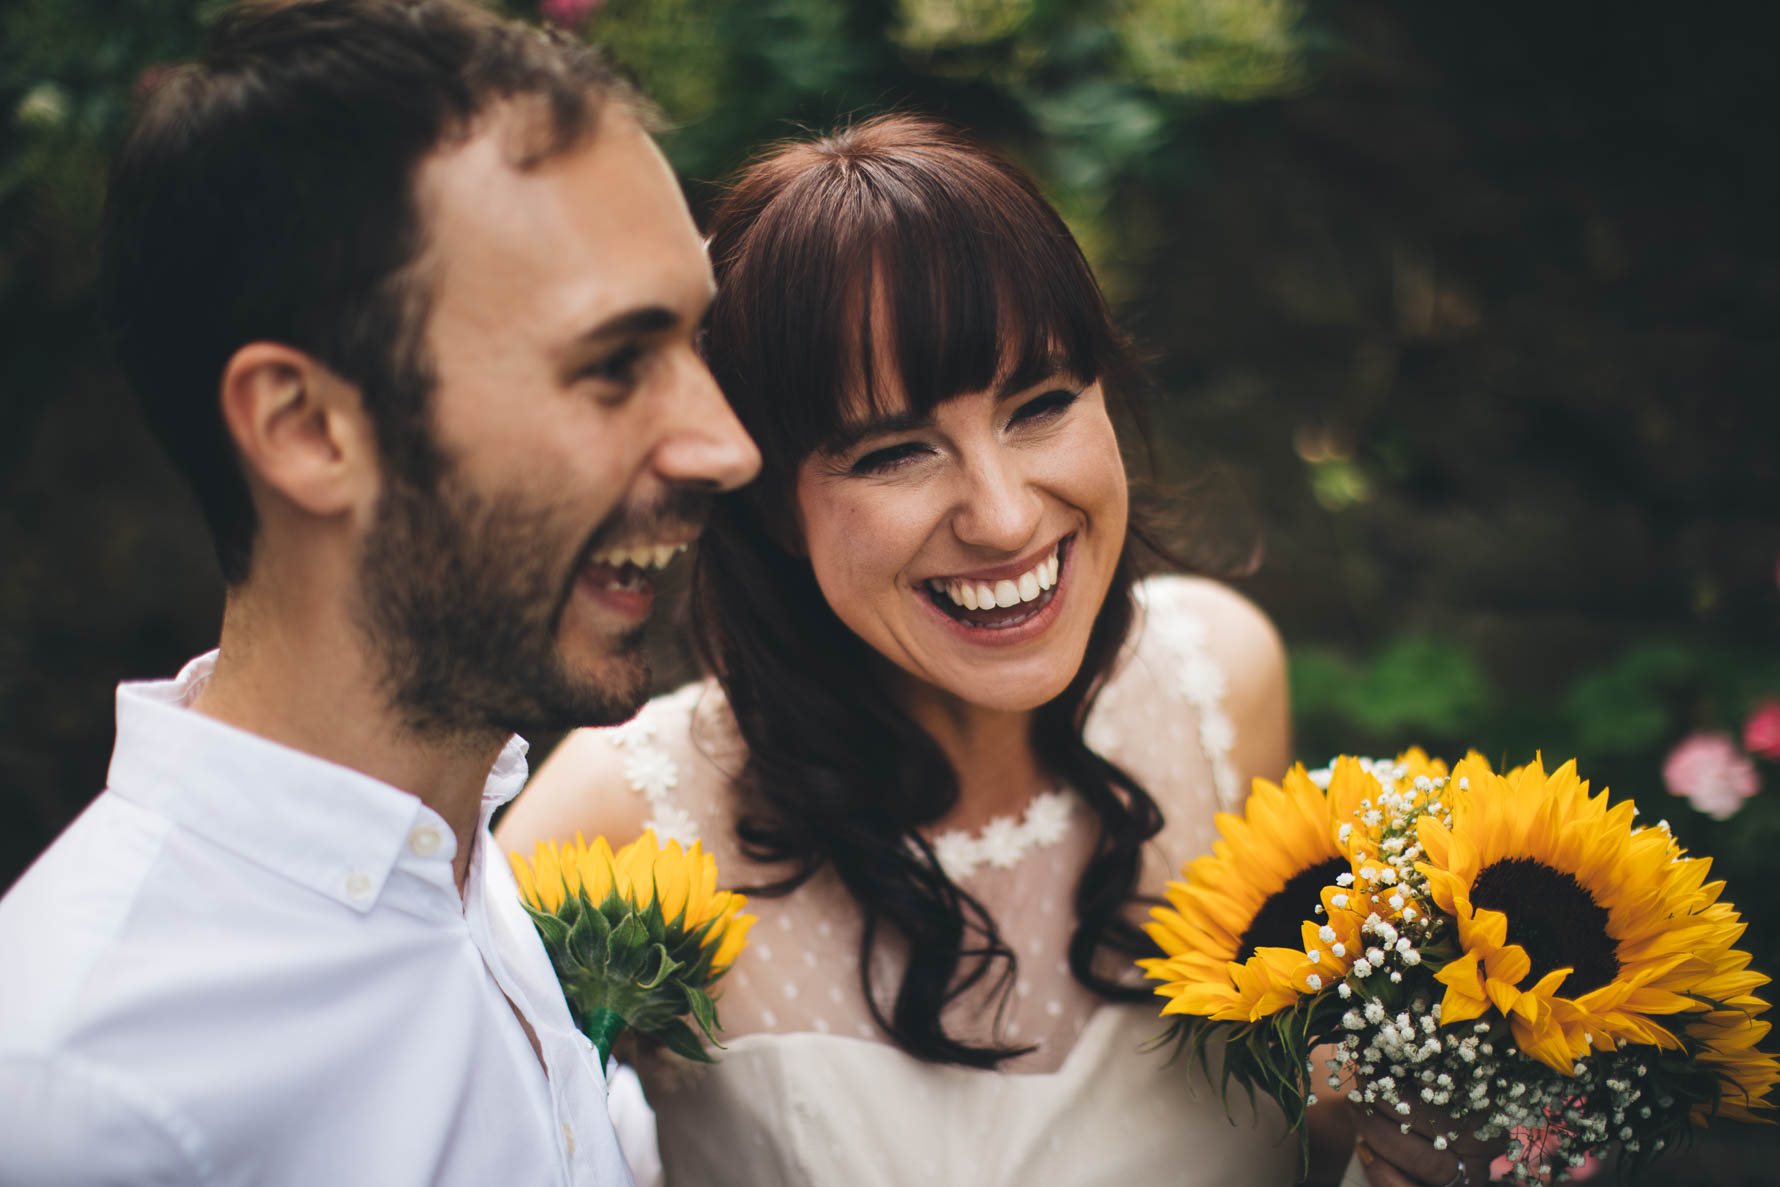 Bride and groom smiling but not looking at the amera. The bride is holding a bouquet of sunflowers and the groom has a sunflower buttonhole on his white shirt